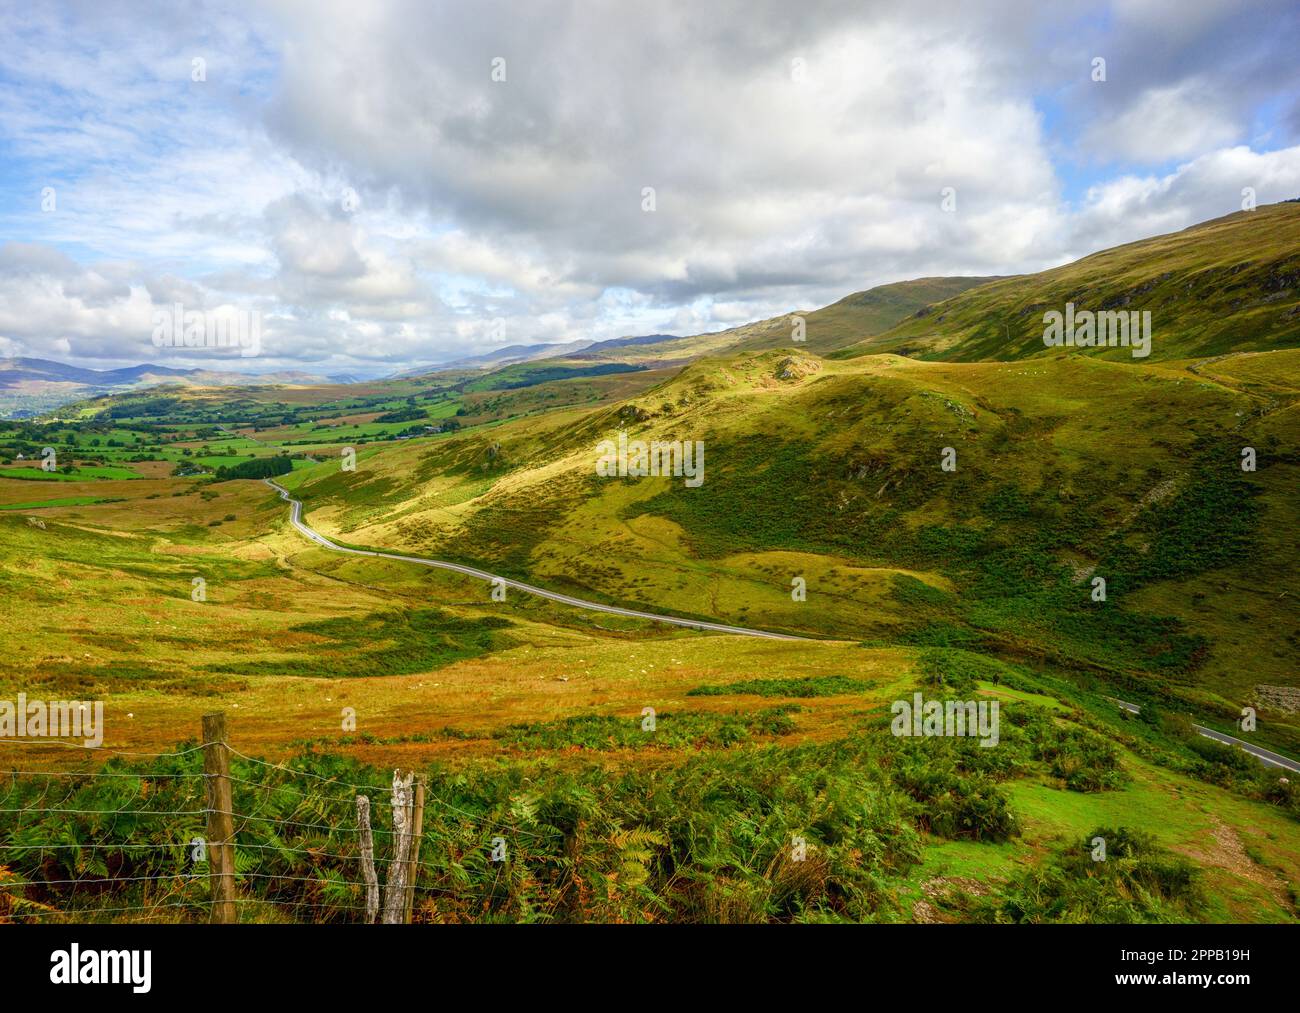 This is the Mach Loop a famous fyling practise area in Wales near Barmouth in the north-west. It's just a small walk up the hill from the car park. Stock Photo